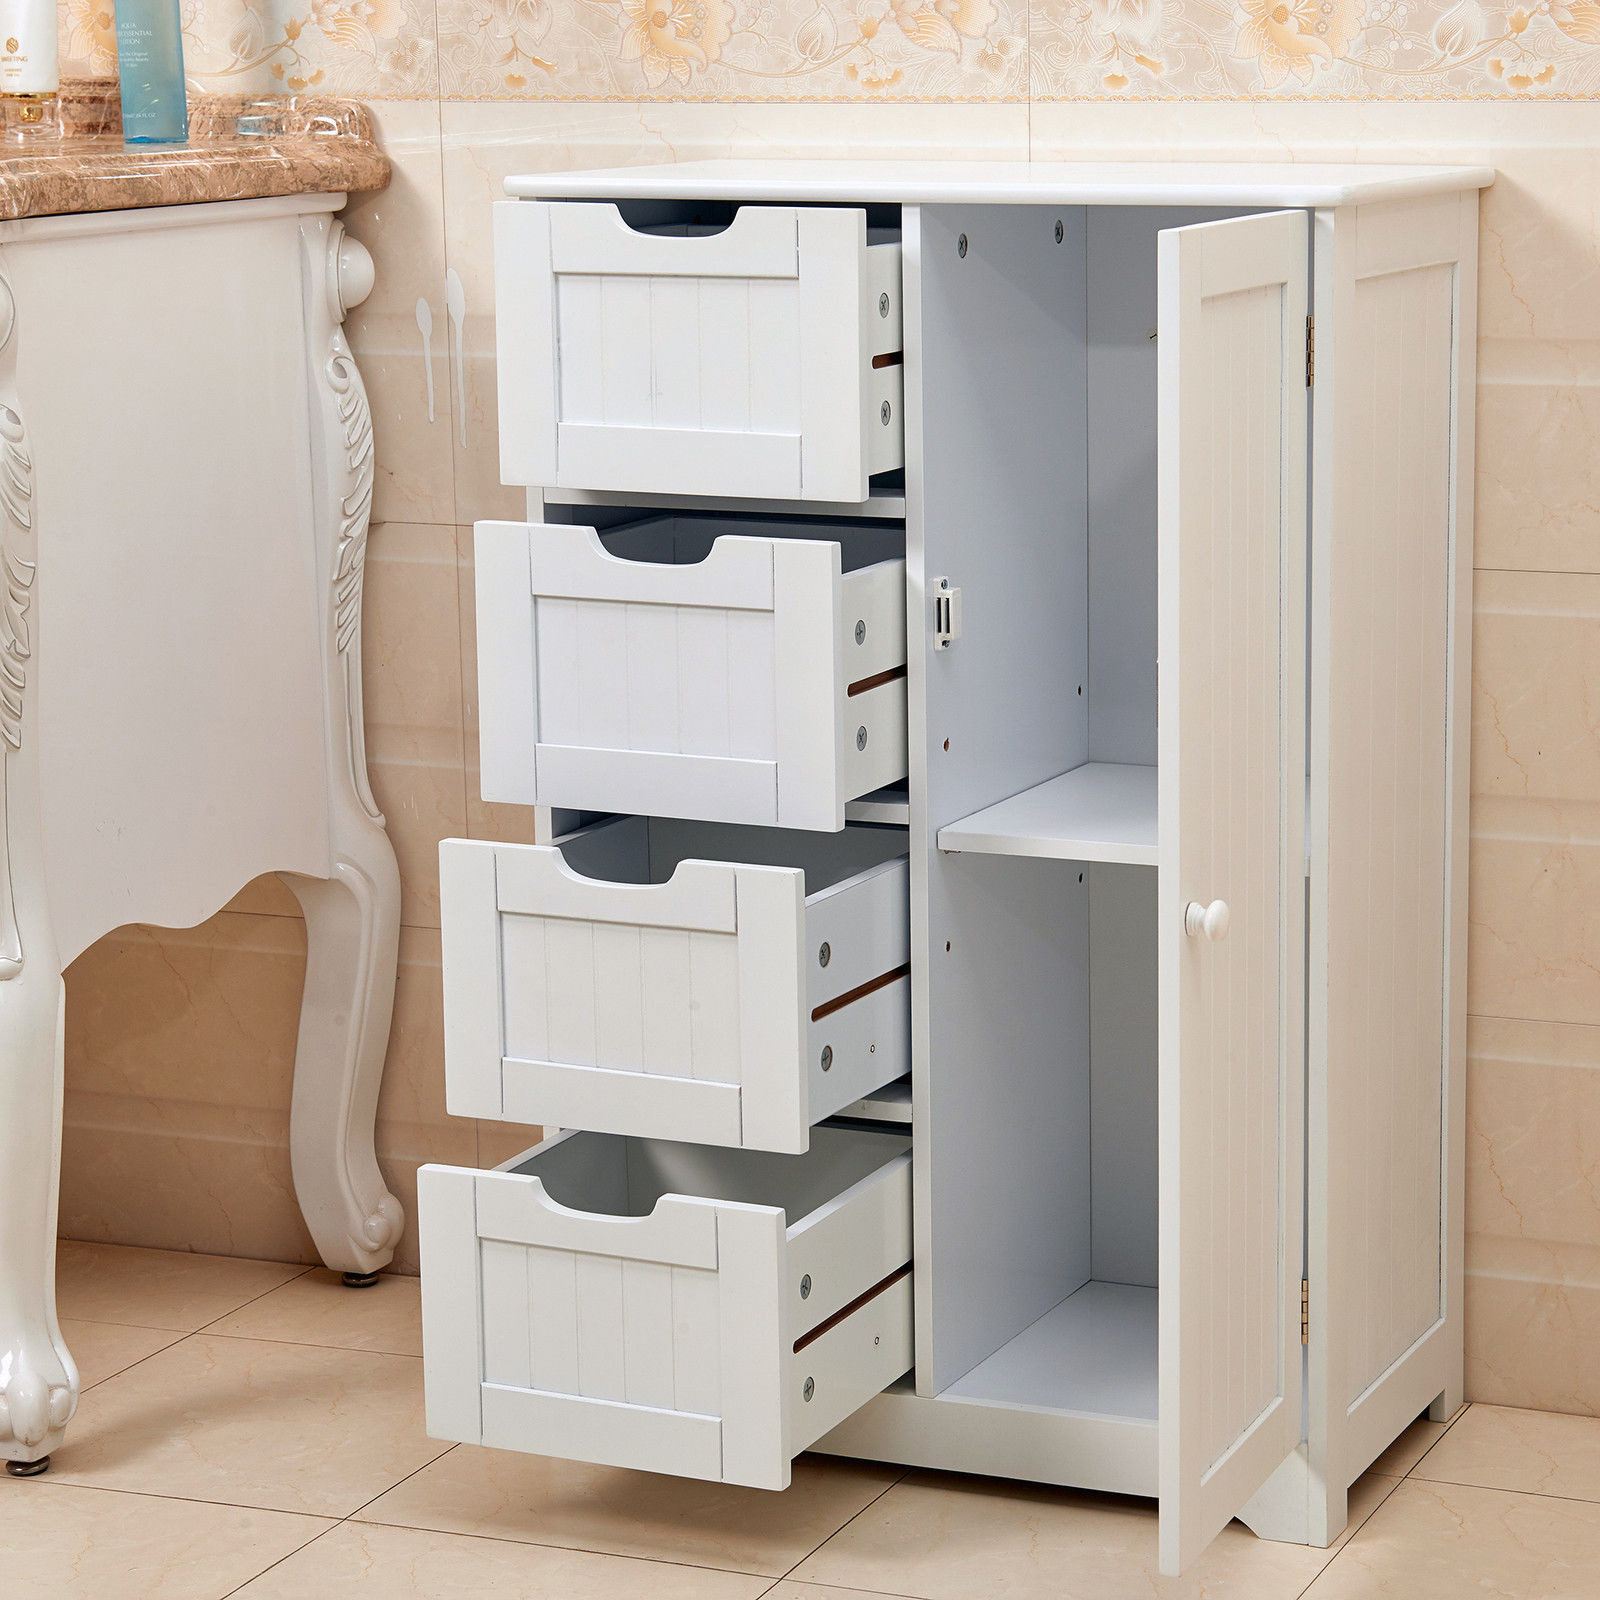 Bedroom Cabinet Storage
 NEW WHITE WOODEN CABINET WITH 4 DRAWERS & CUPBOARD STORAGE